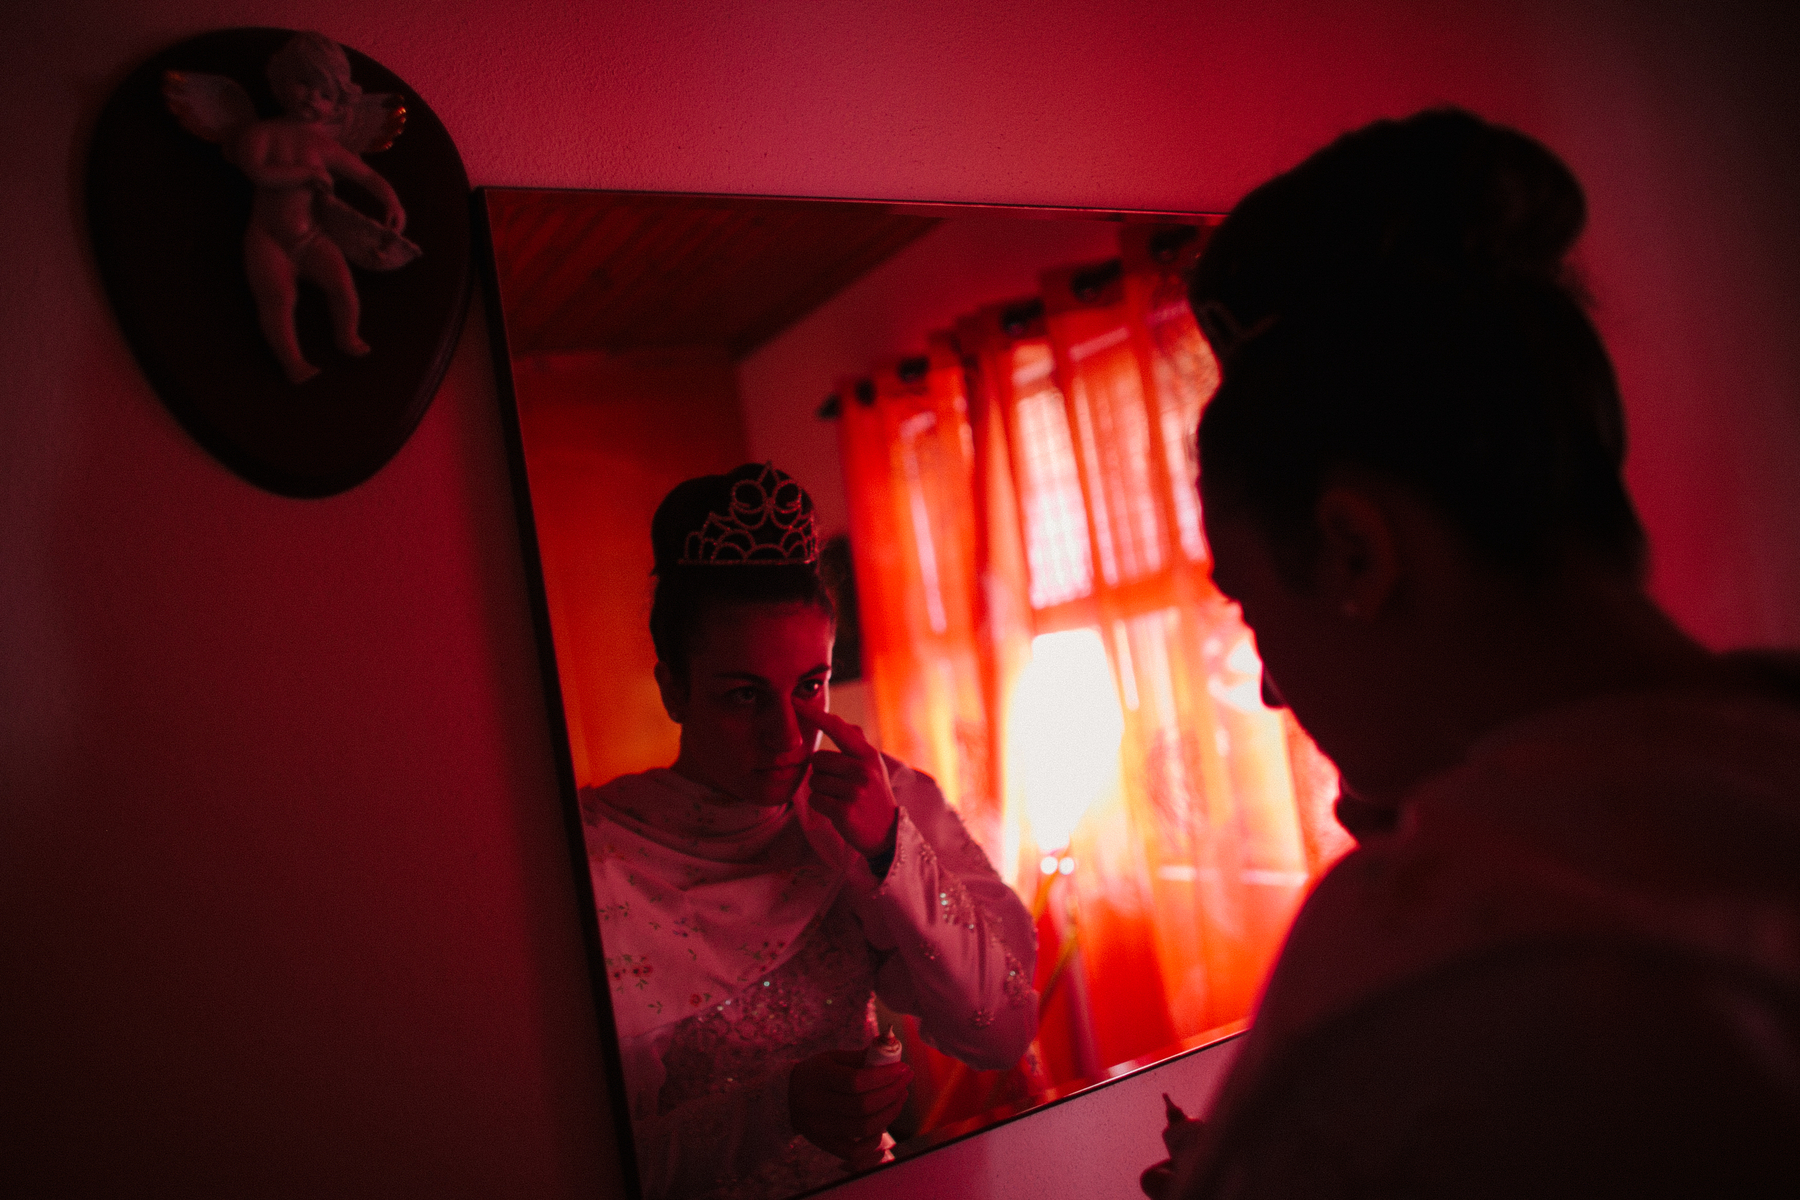 A girl applies makeup on a red lit room.